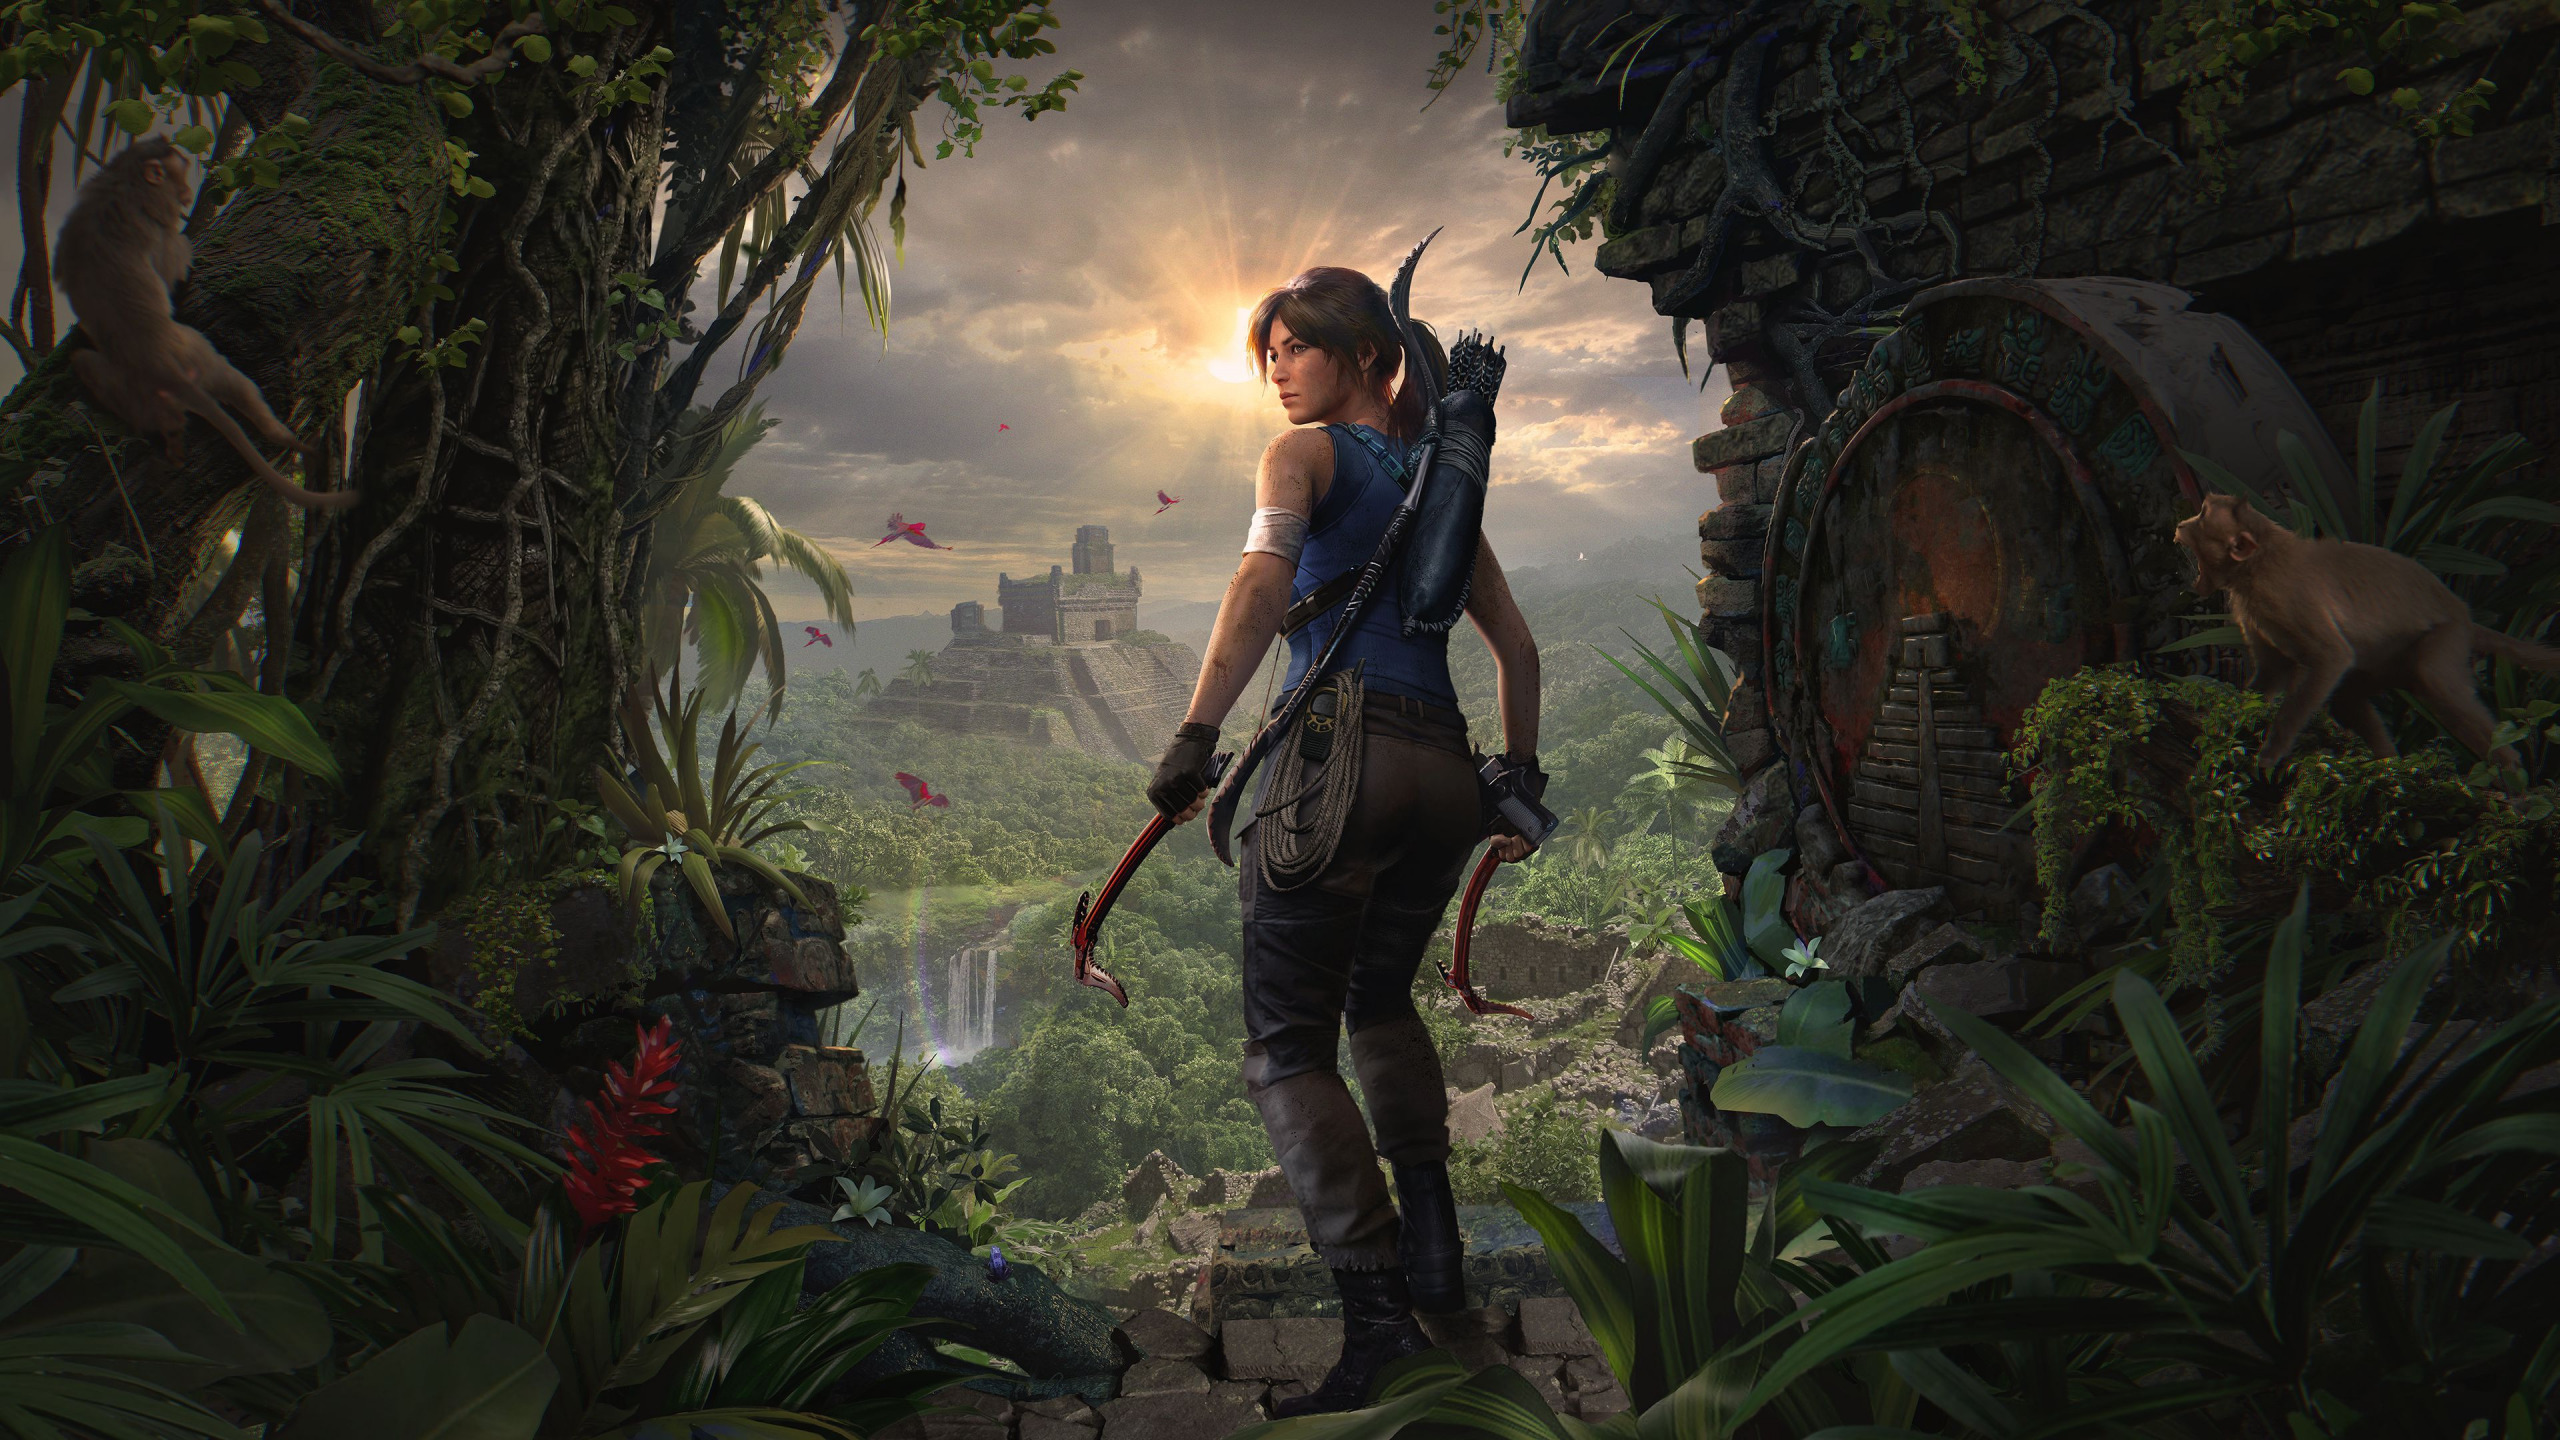 New tomb raider game developed in unreal engine 5 announced